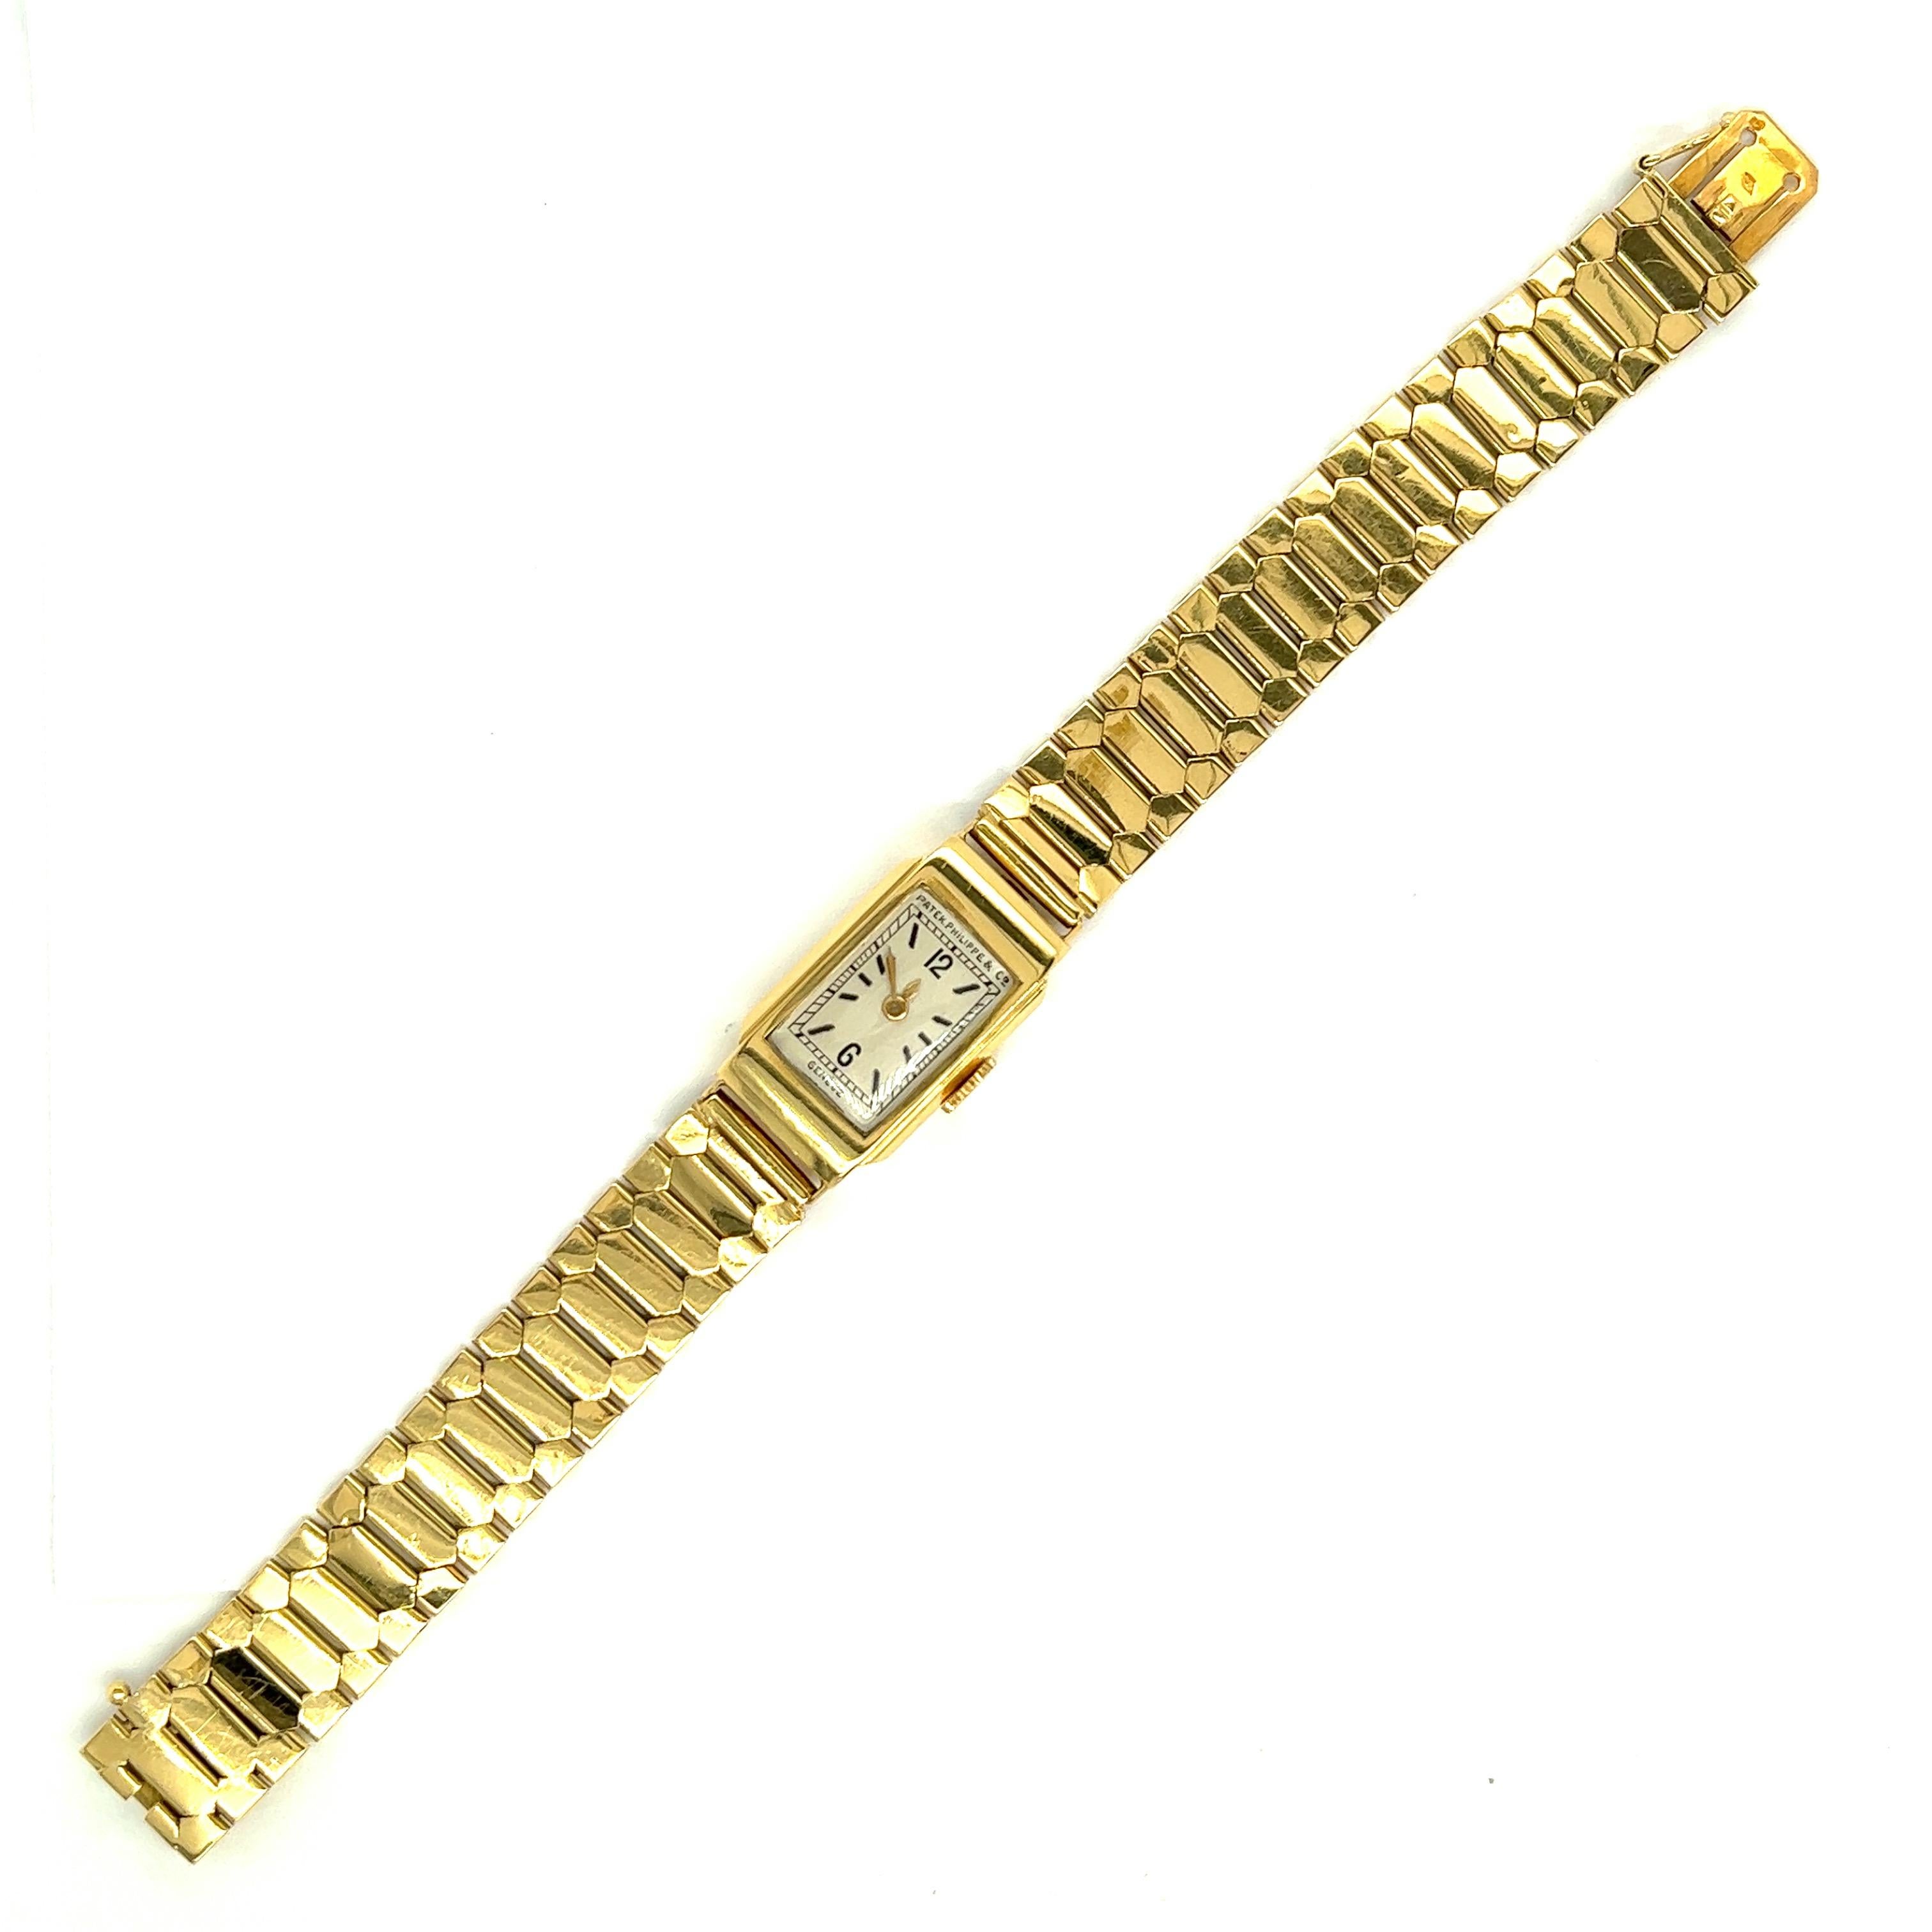 Patek Philippe & Co. Genéve Yellow Gold Lady's Wristwatch

A Patek Philippe & Co. lady's wristwatch made of yellow gold, featuring a rectangular-shaped case with 12 and 6 for time and black lines to represent other hours; the straps present a